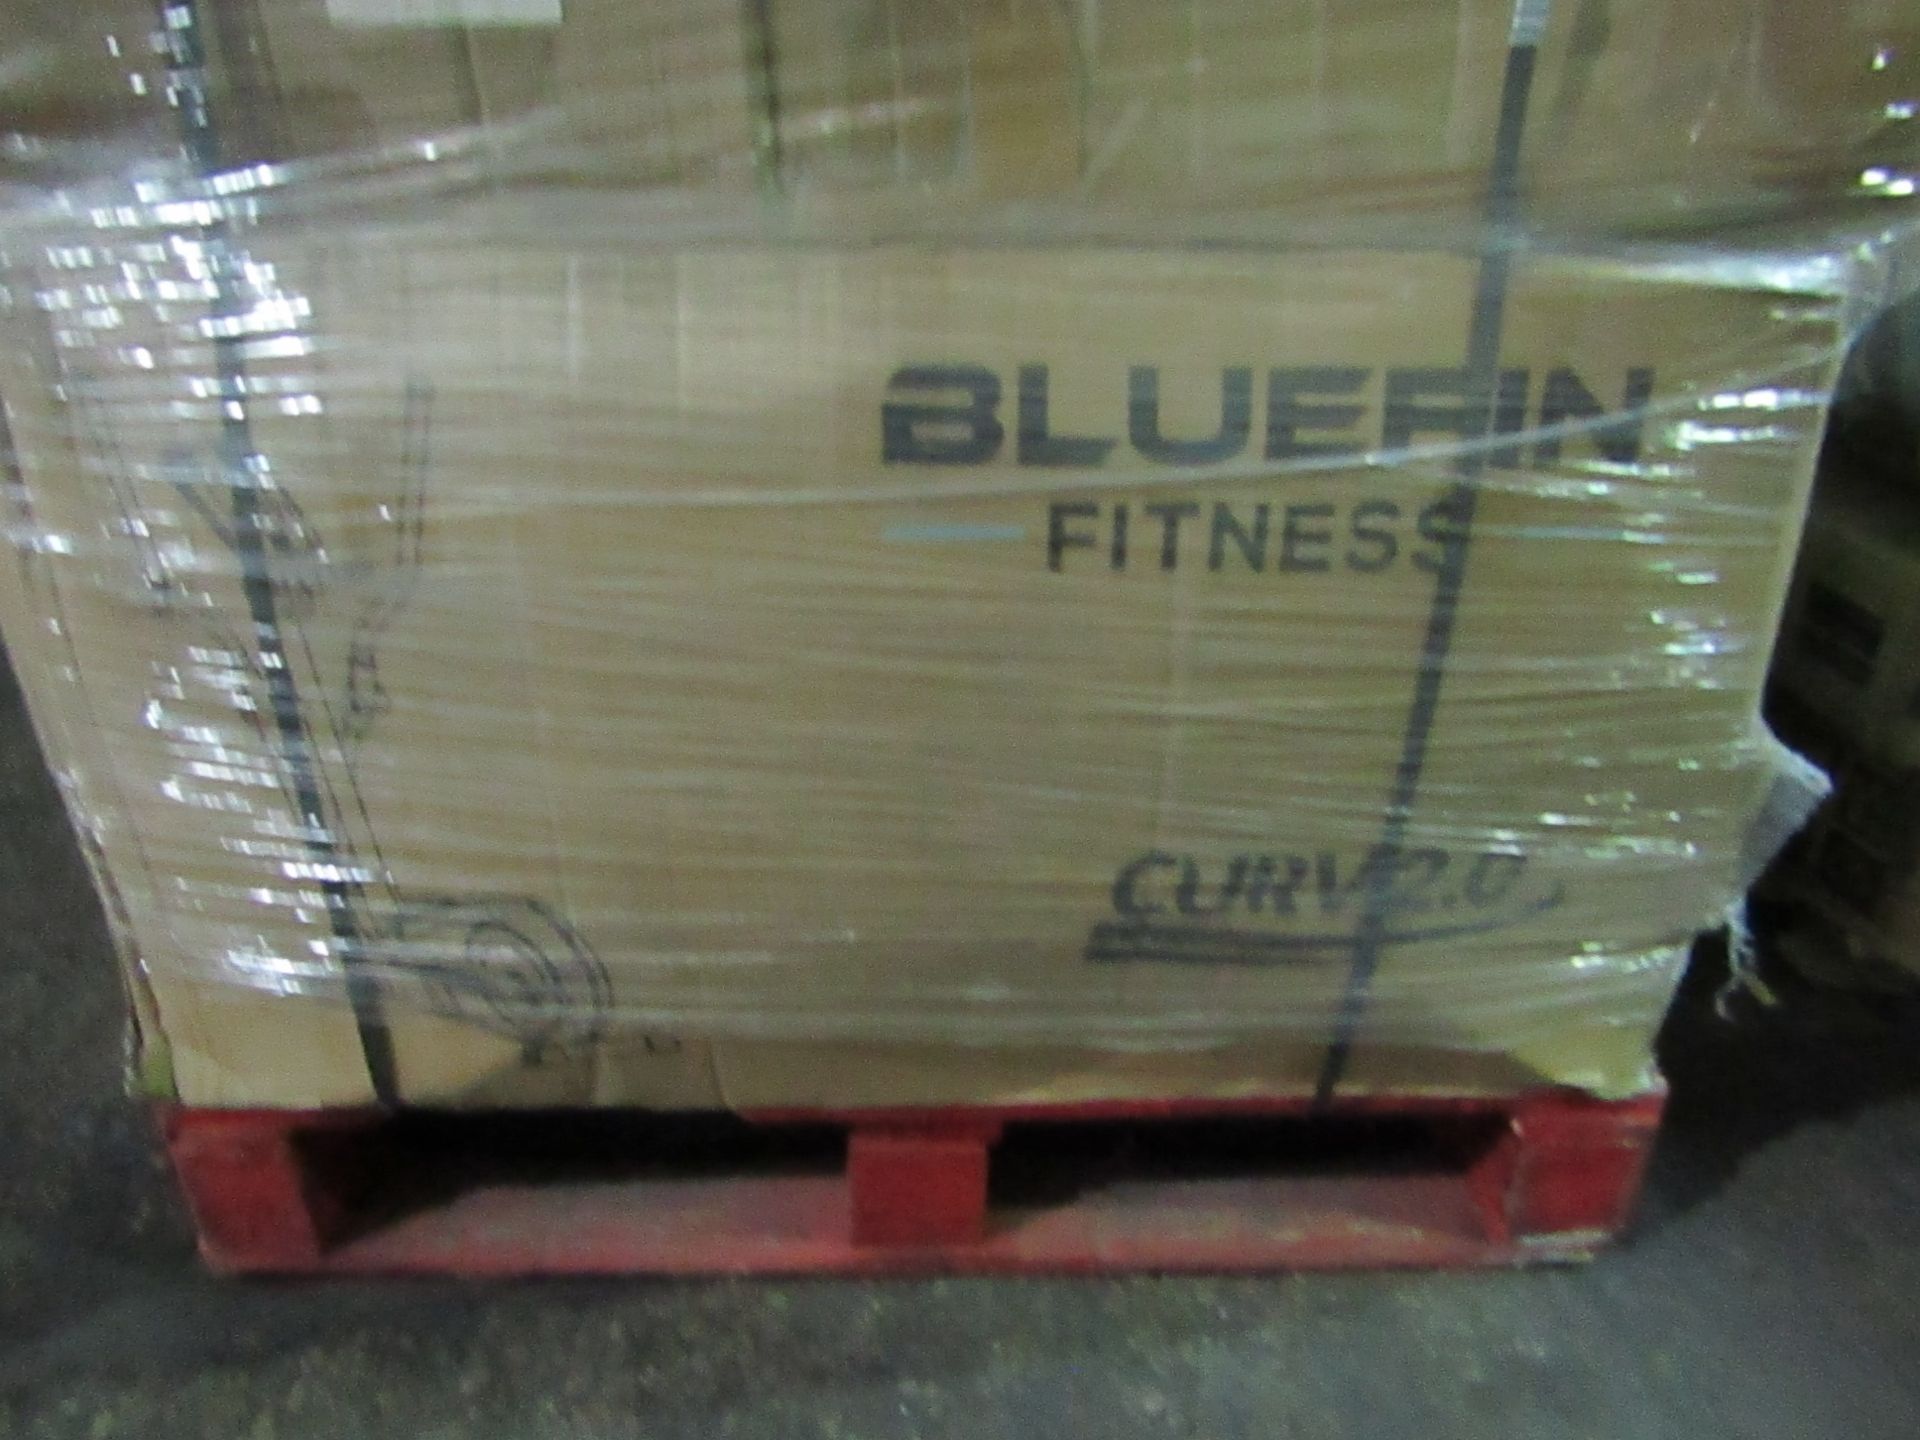 Lot 45 is for 12 Items from Bluefin Fitness total RRP ô?4188Lot includes:Bluefin Fitness Tour 5.0 - Image 2 of 2